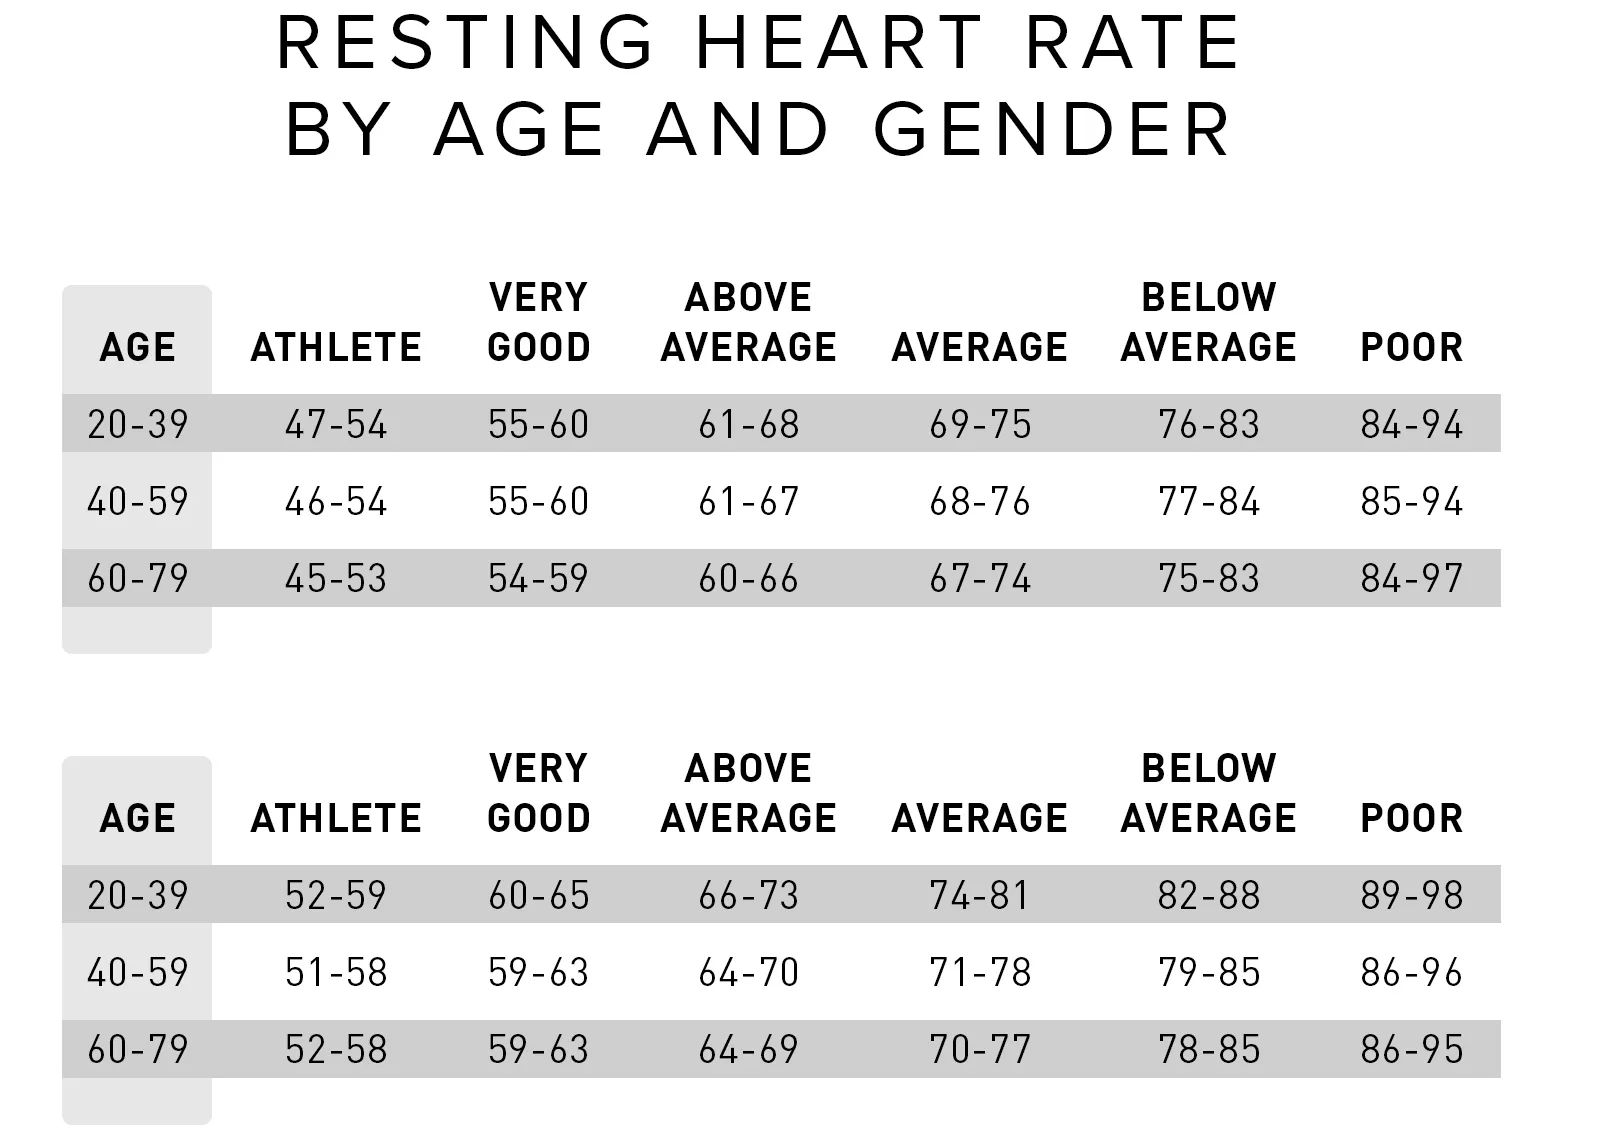 Normal resting heart rate appears to vary widely from person to person